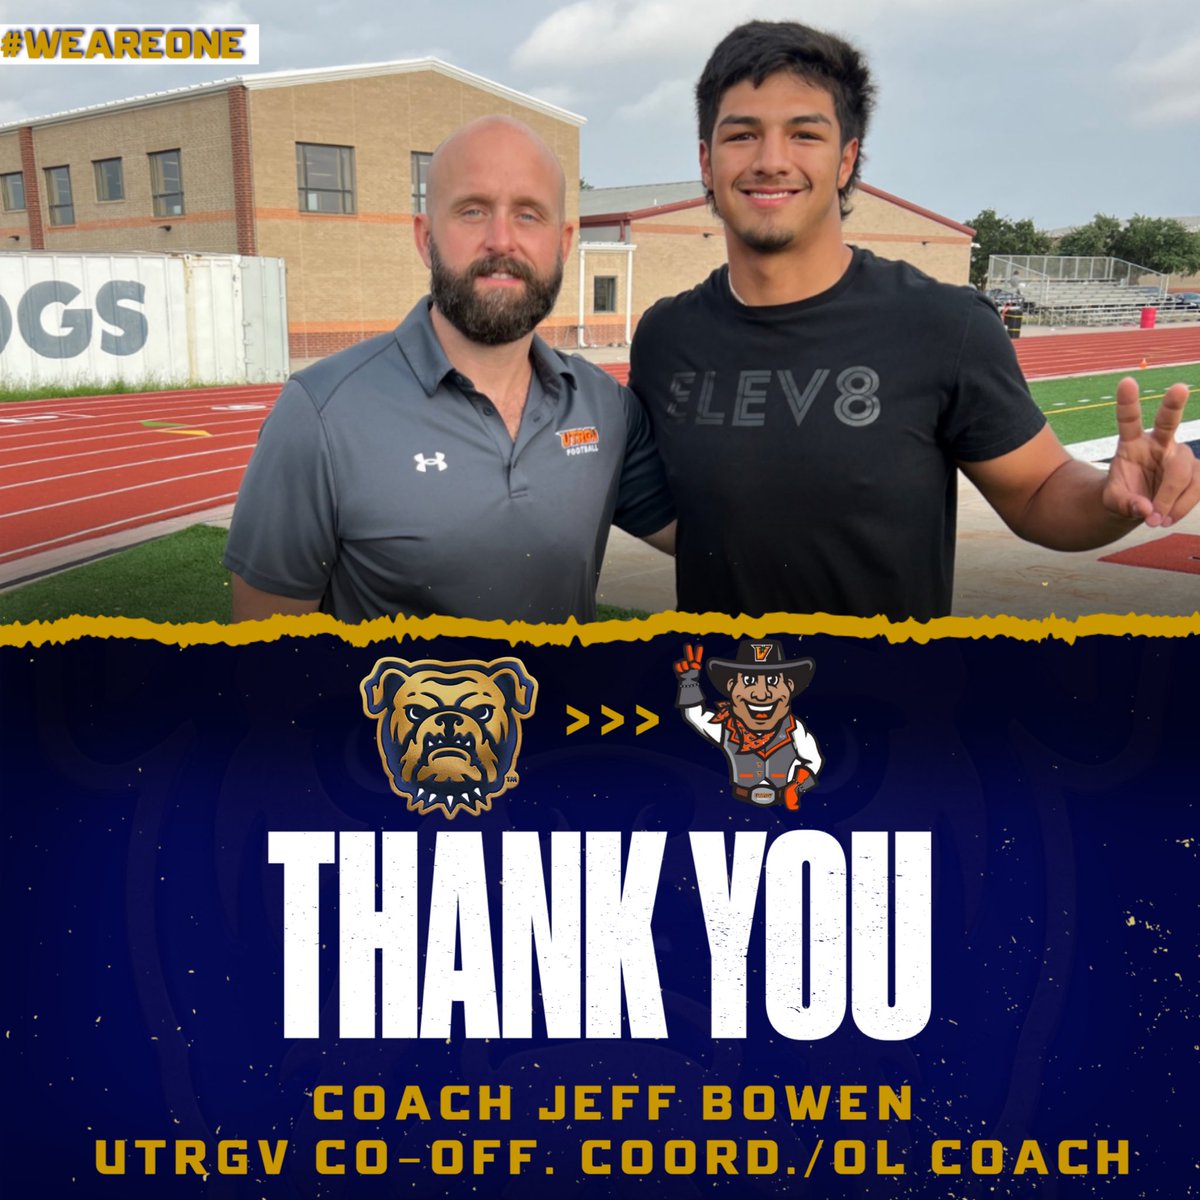 Thank you @CoachJeffBowen For Stopping by the DawgPound this morning to see our Bulldogs & appreciate you stopping by to check on future Vaquero @jorgealvarad019 #RecruitTheDawgPound @RecruitThePound @UTRGVFootball @UTRGV_FBRecruit @CoachEdGarcia @CoachMikeVigil